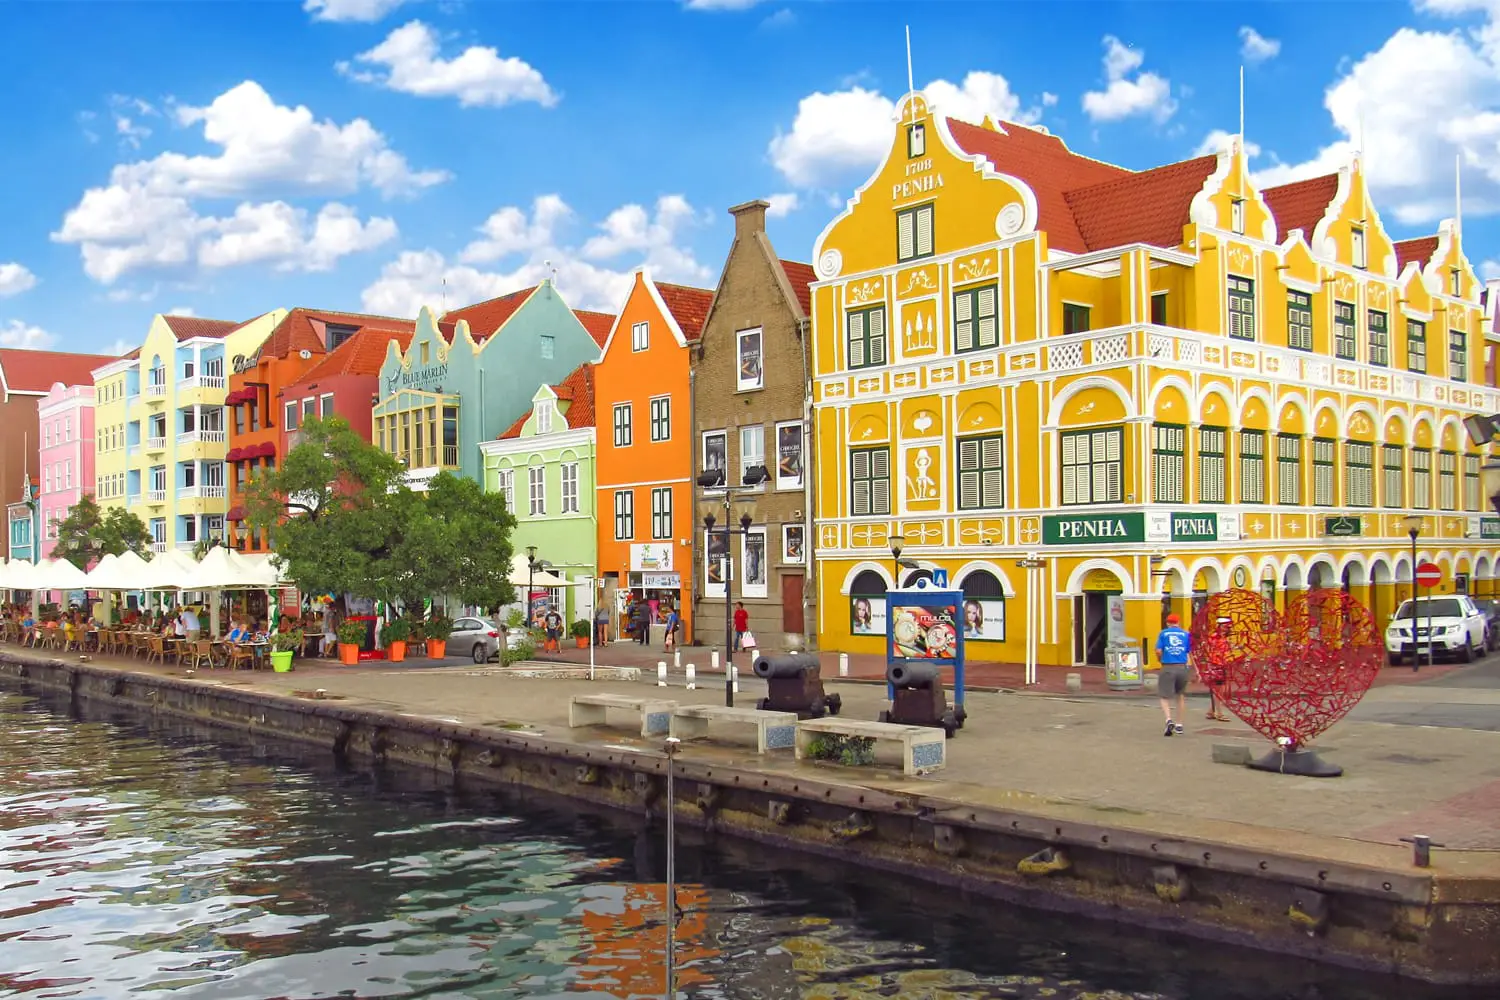 A view from Queen Emma Bridge, Willemstad, Curacao